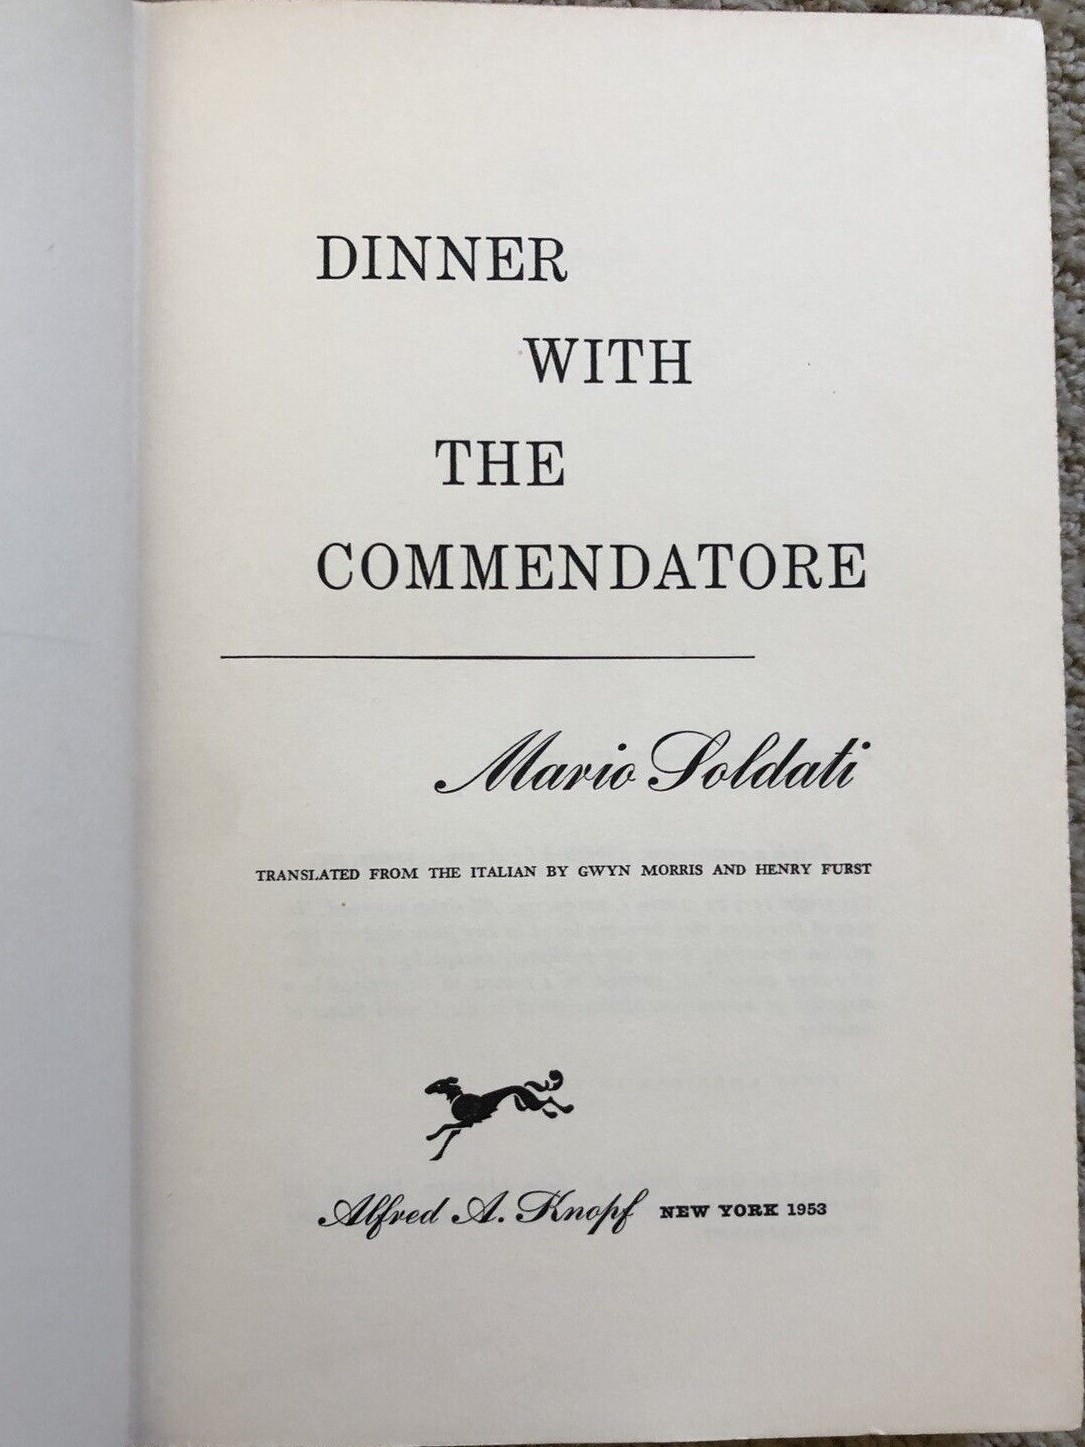 Mario Soldati - Dinner with the Commendatore (Alfred A. Knopf, 1953)